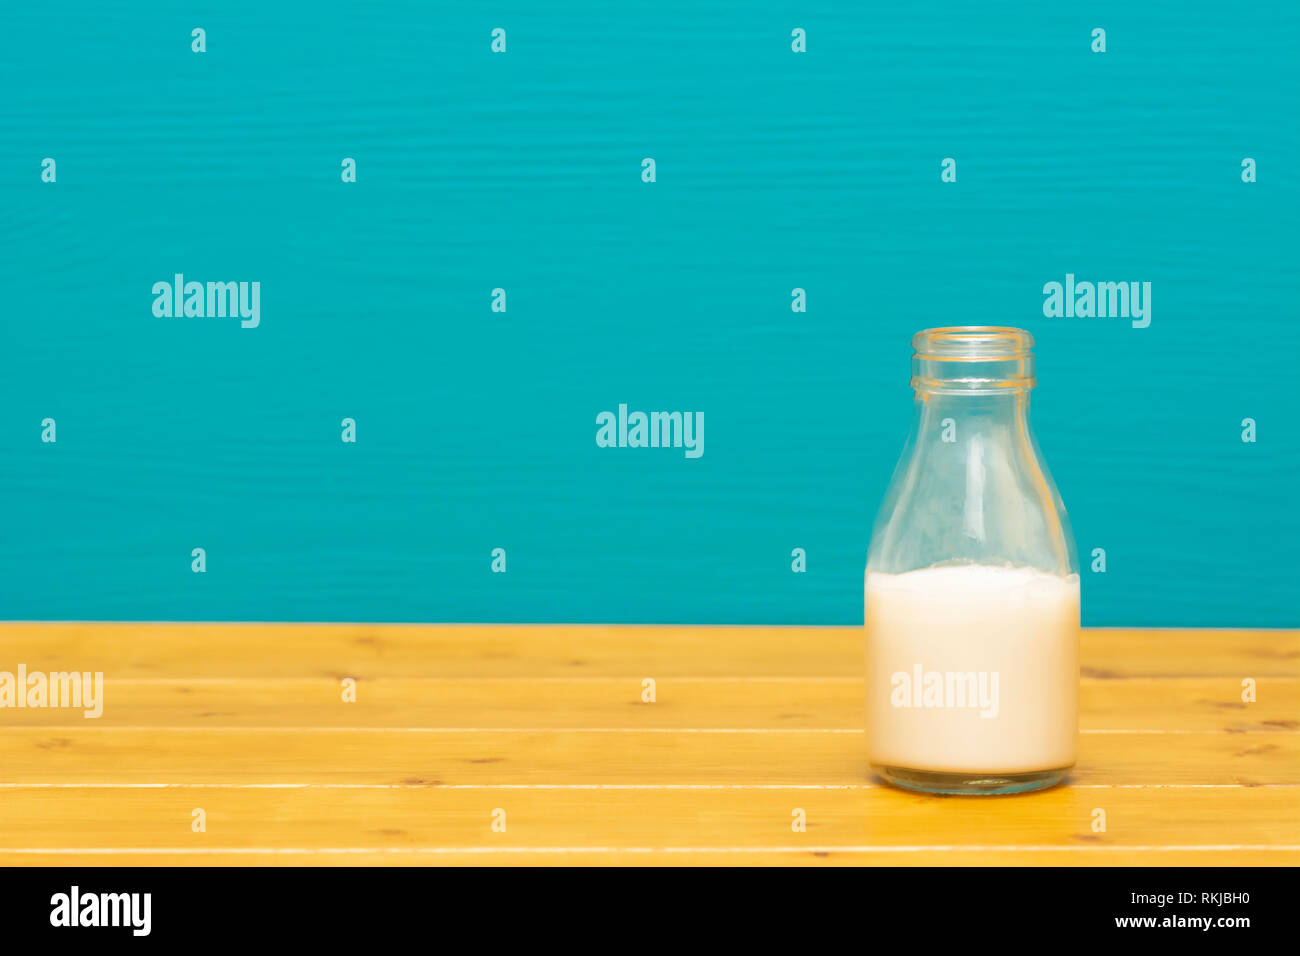 One-third pint glass milk bottle half full with fresh creamy milk, on a wooden table against a bright teal painted background Stock Photo